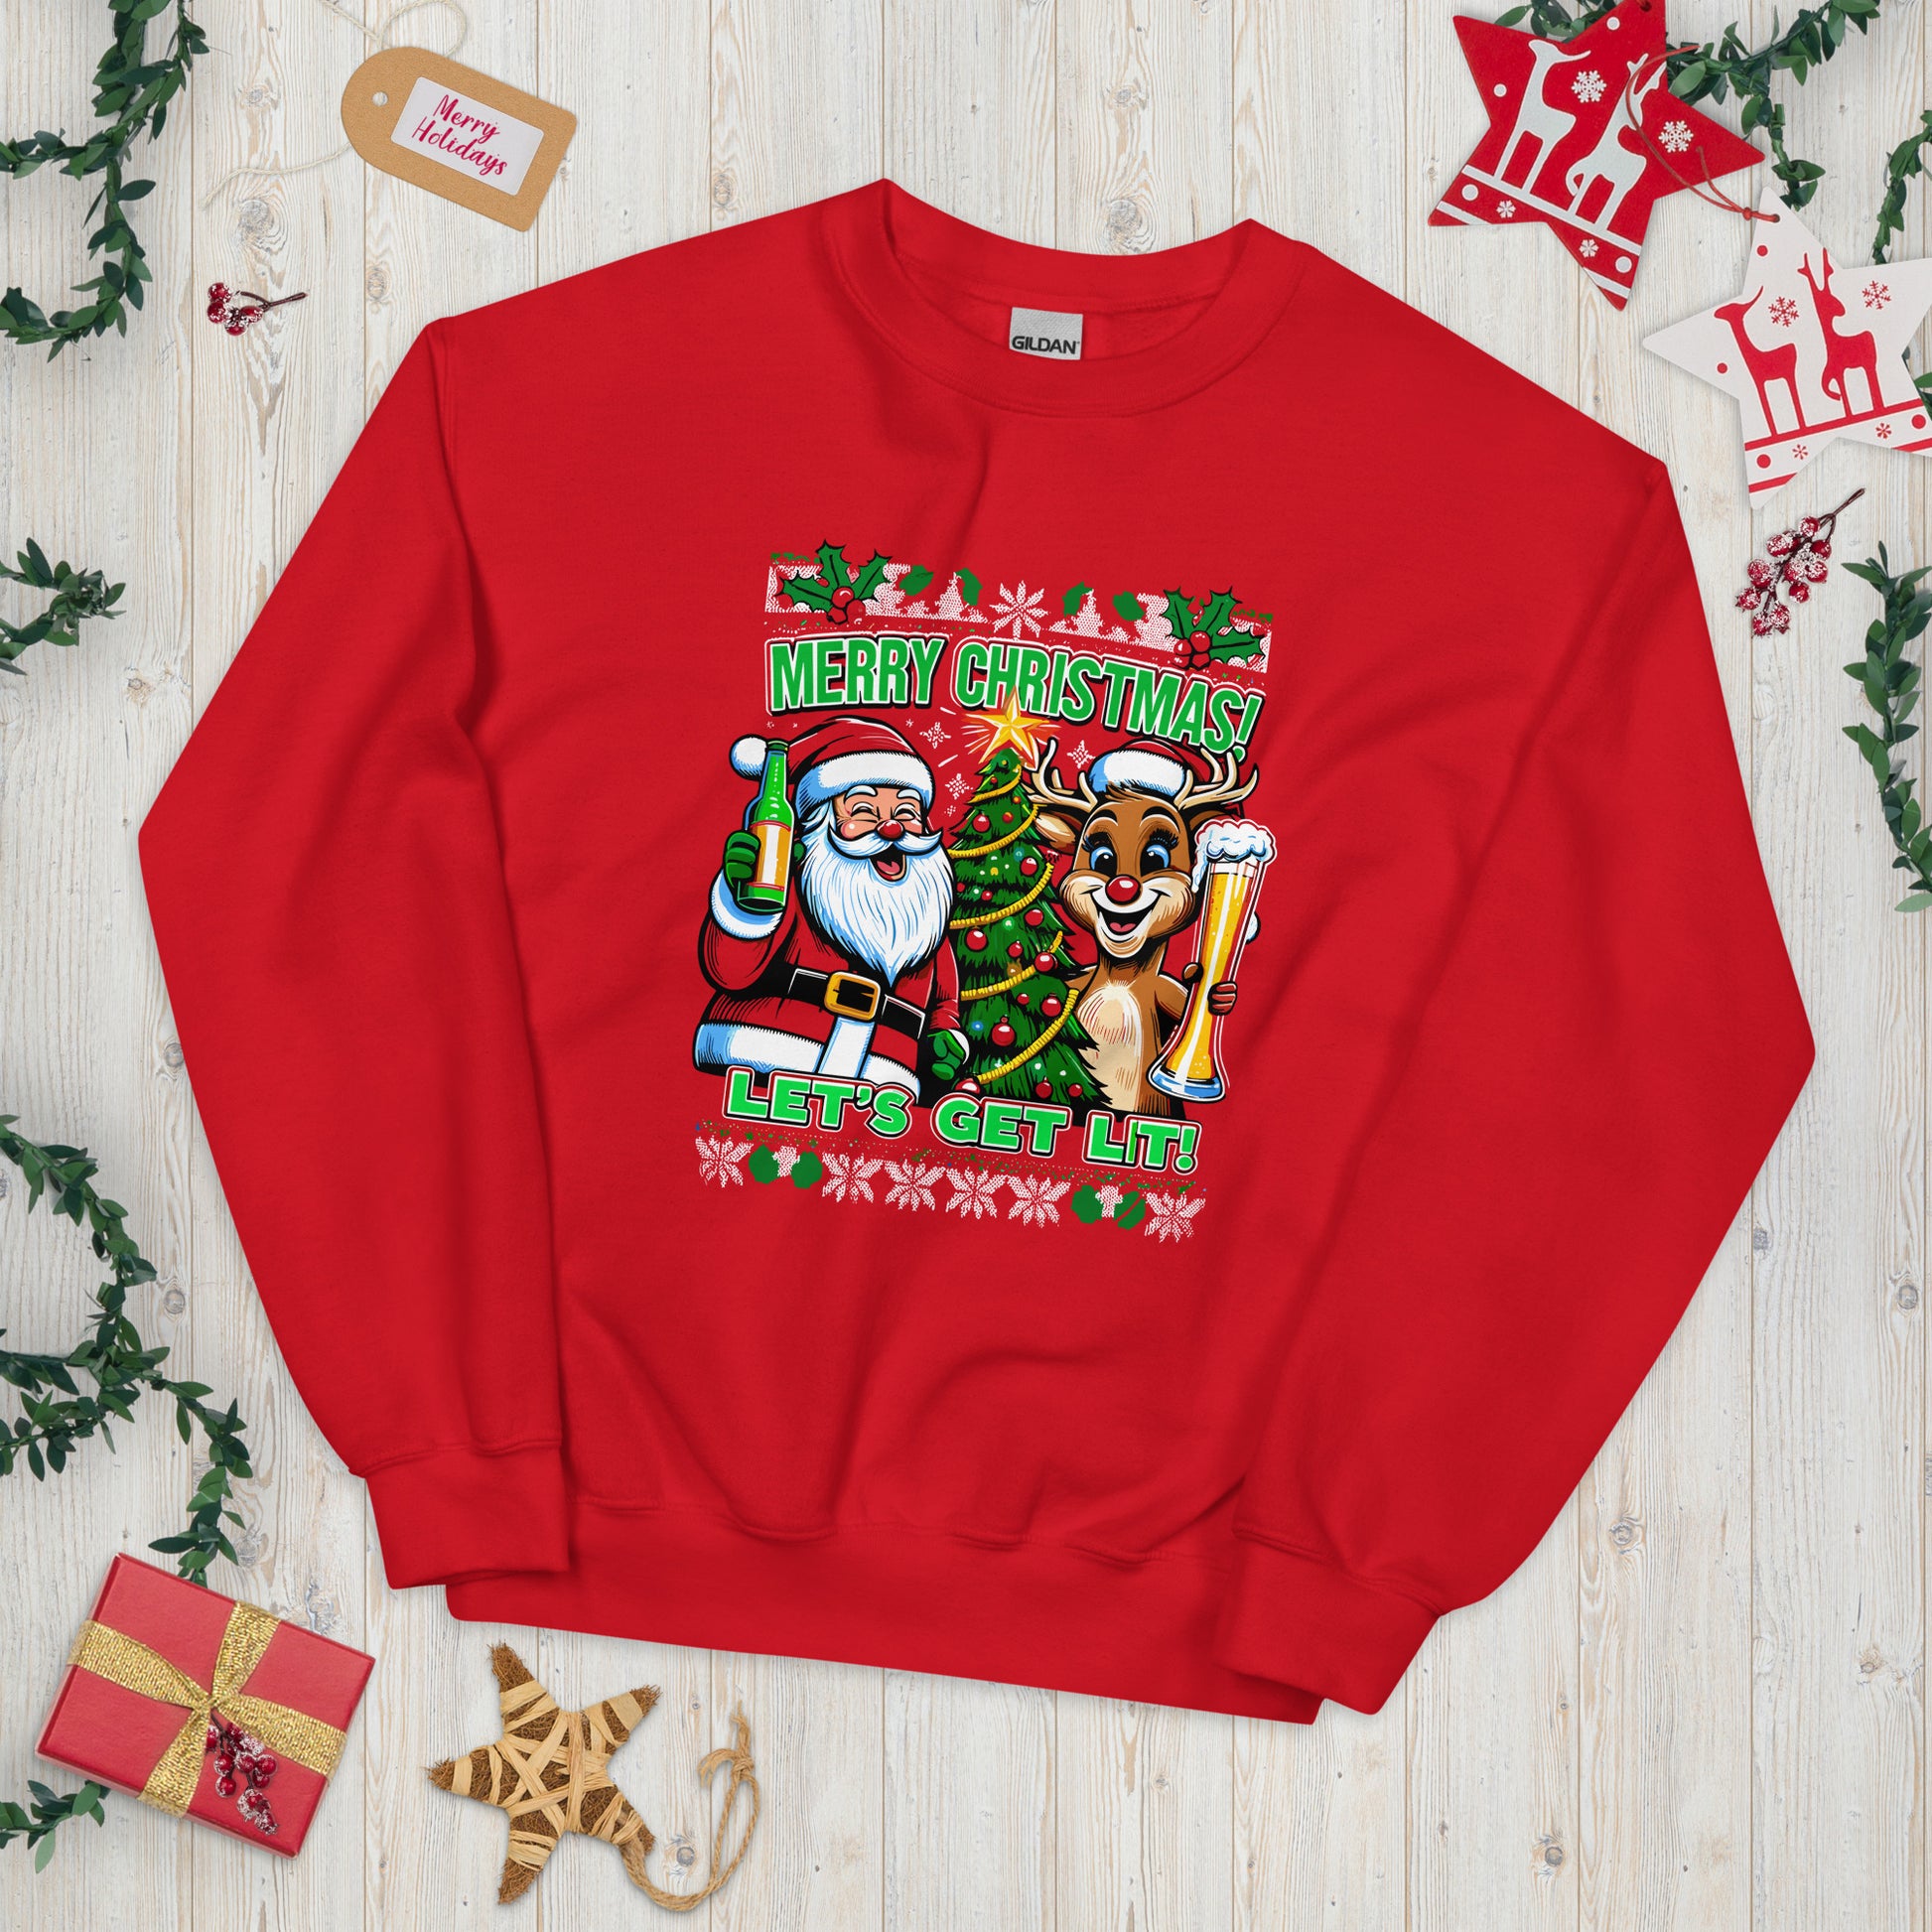 Merry Christmas lets get lit with santa and rudolf printed ugly christmas sweater by Whistler Shirts